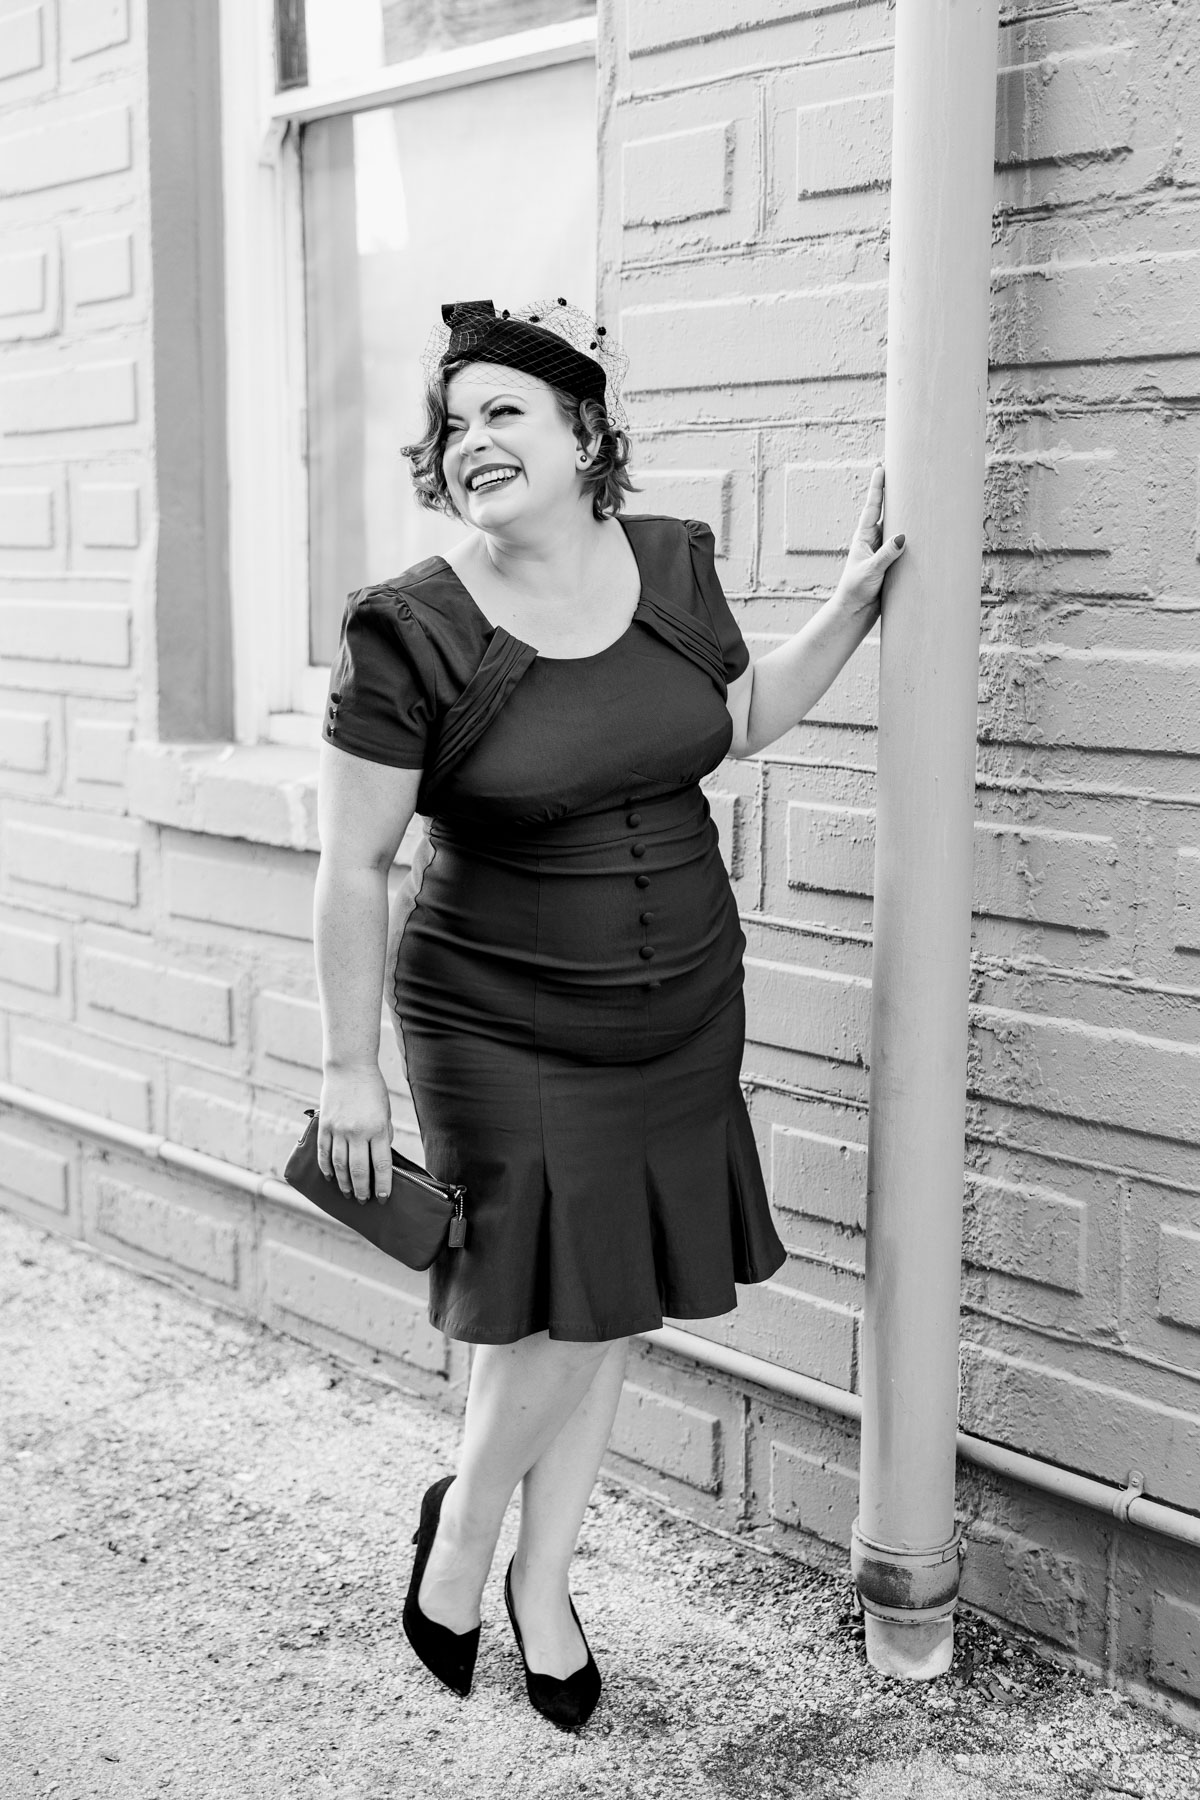 Black and white photo 1950's dress pill box hat and clutch purse